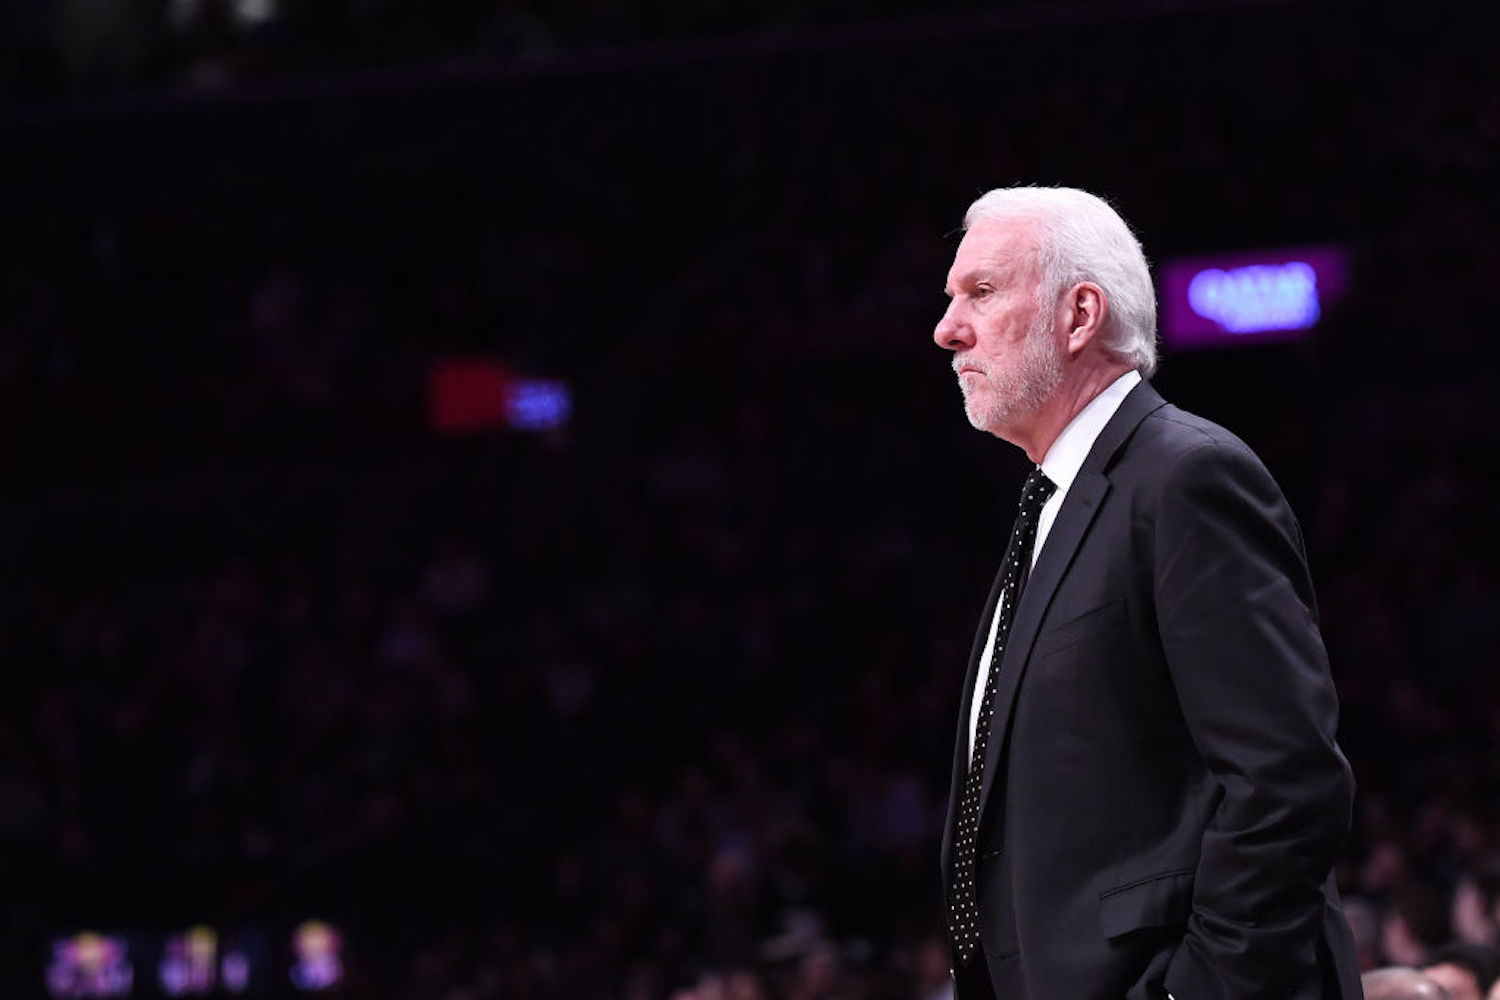 Gregg Popovich has been the head coach of the San Antonio Spurs for 24 years, but he might finally have a new home in 2021.